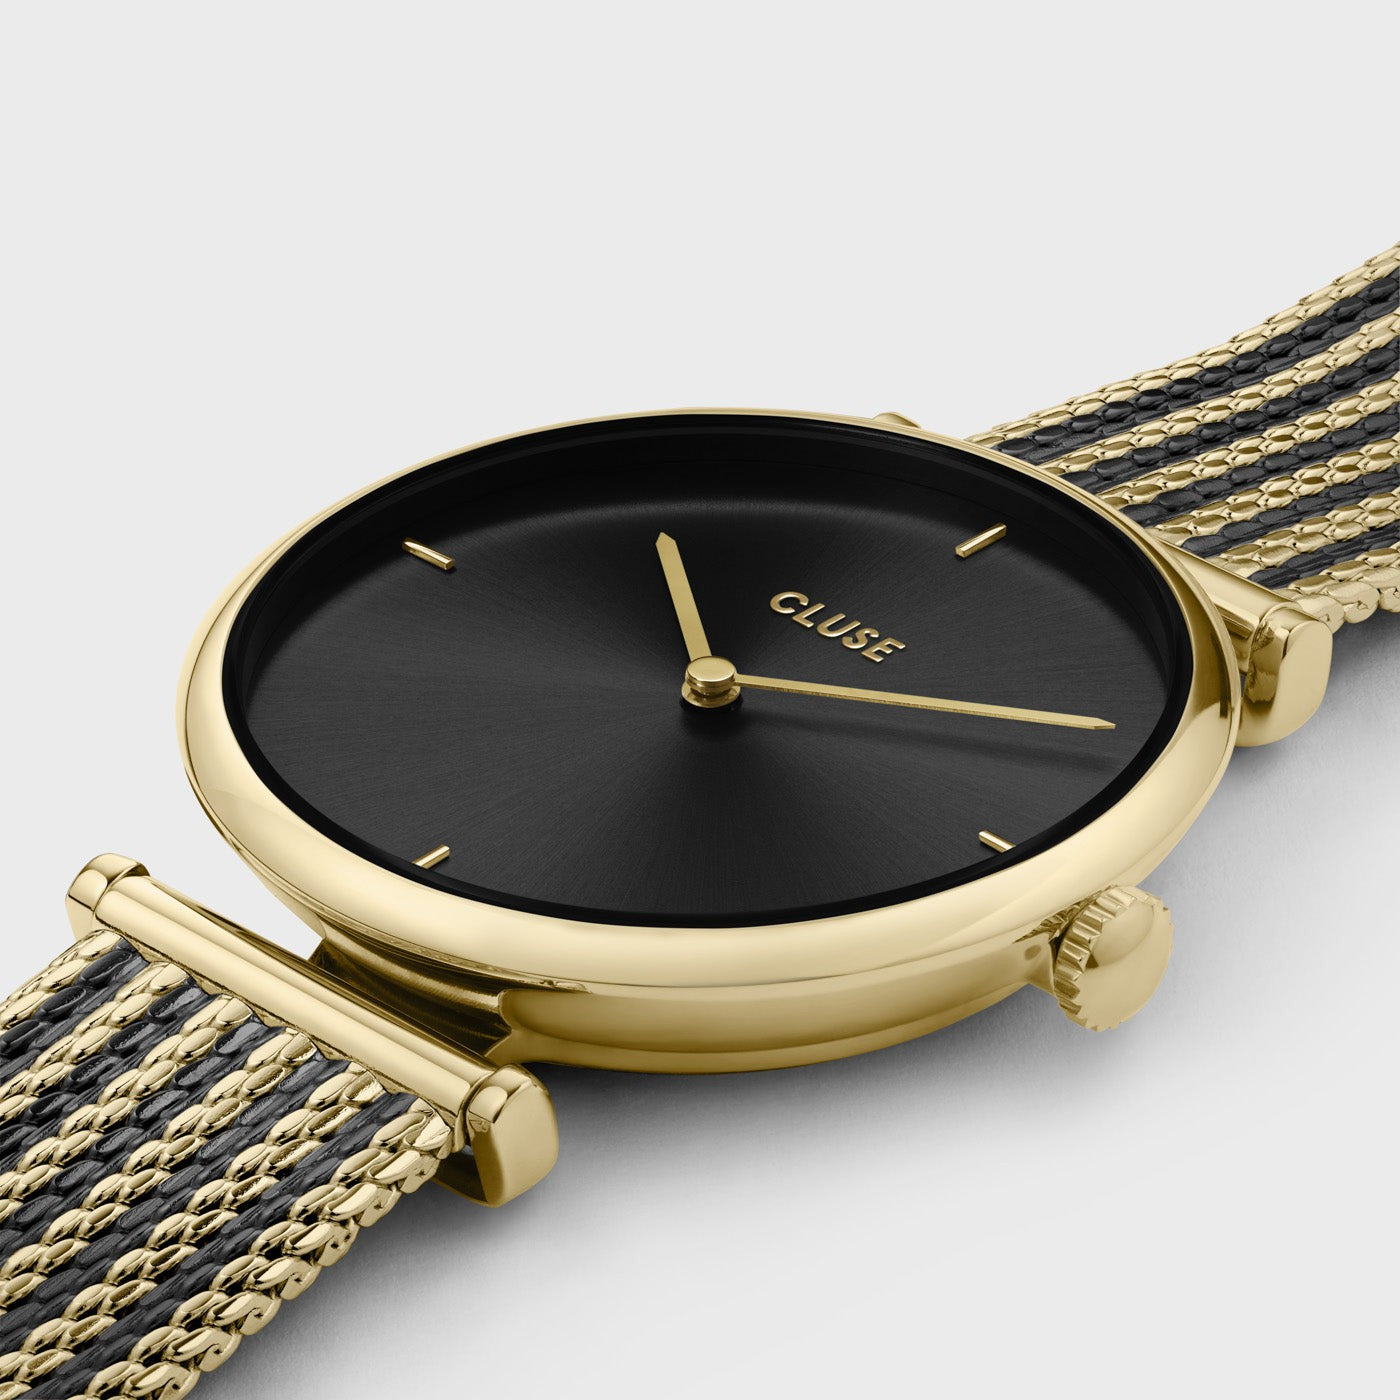 CLUSE Triomphe Watch CW10403 Gold/Black - Official CLUSE Store